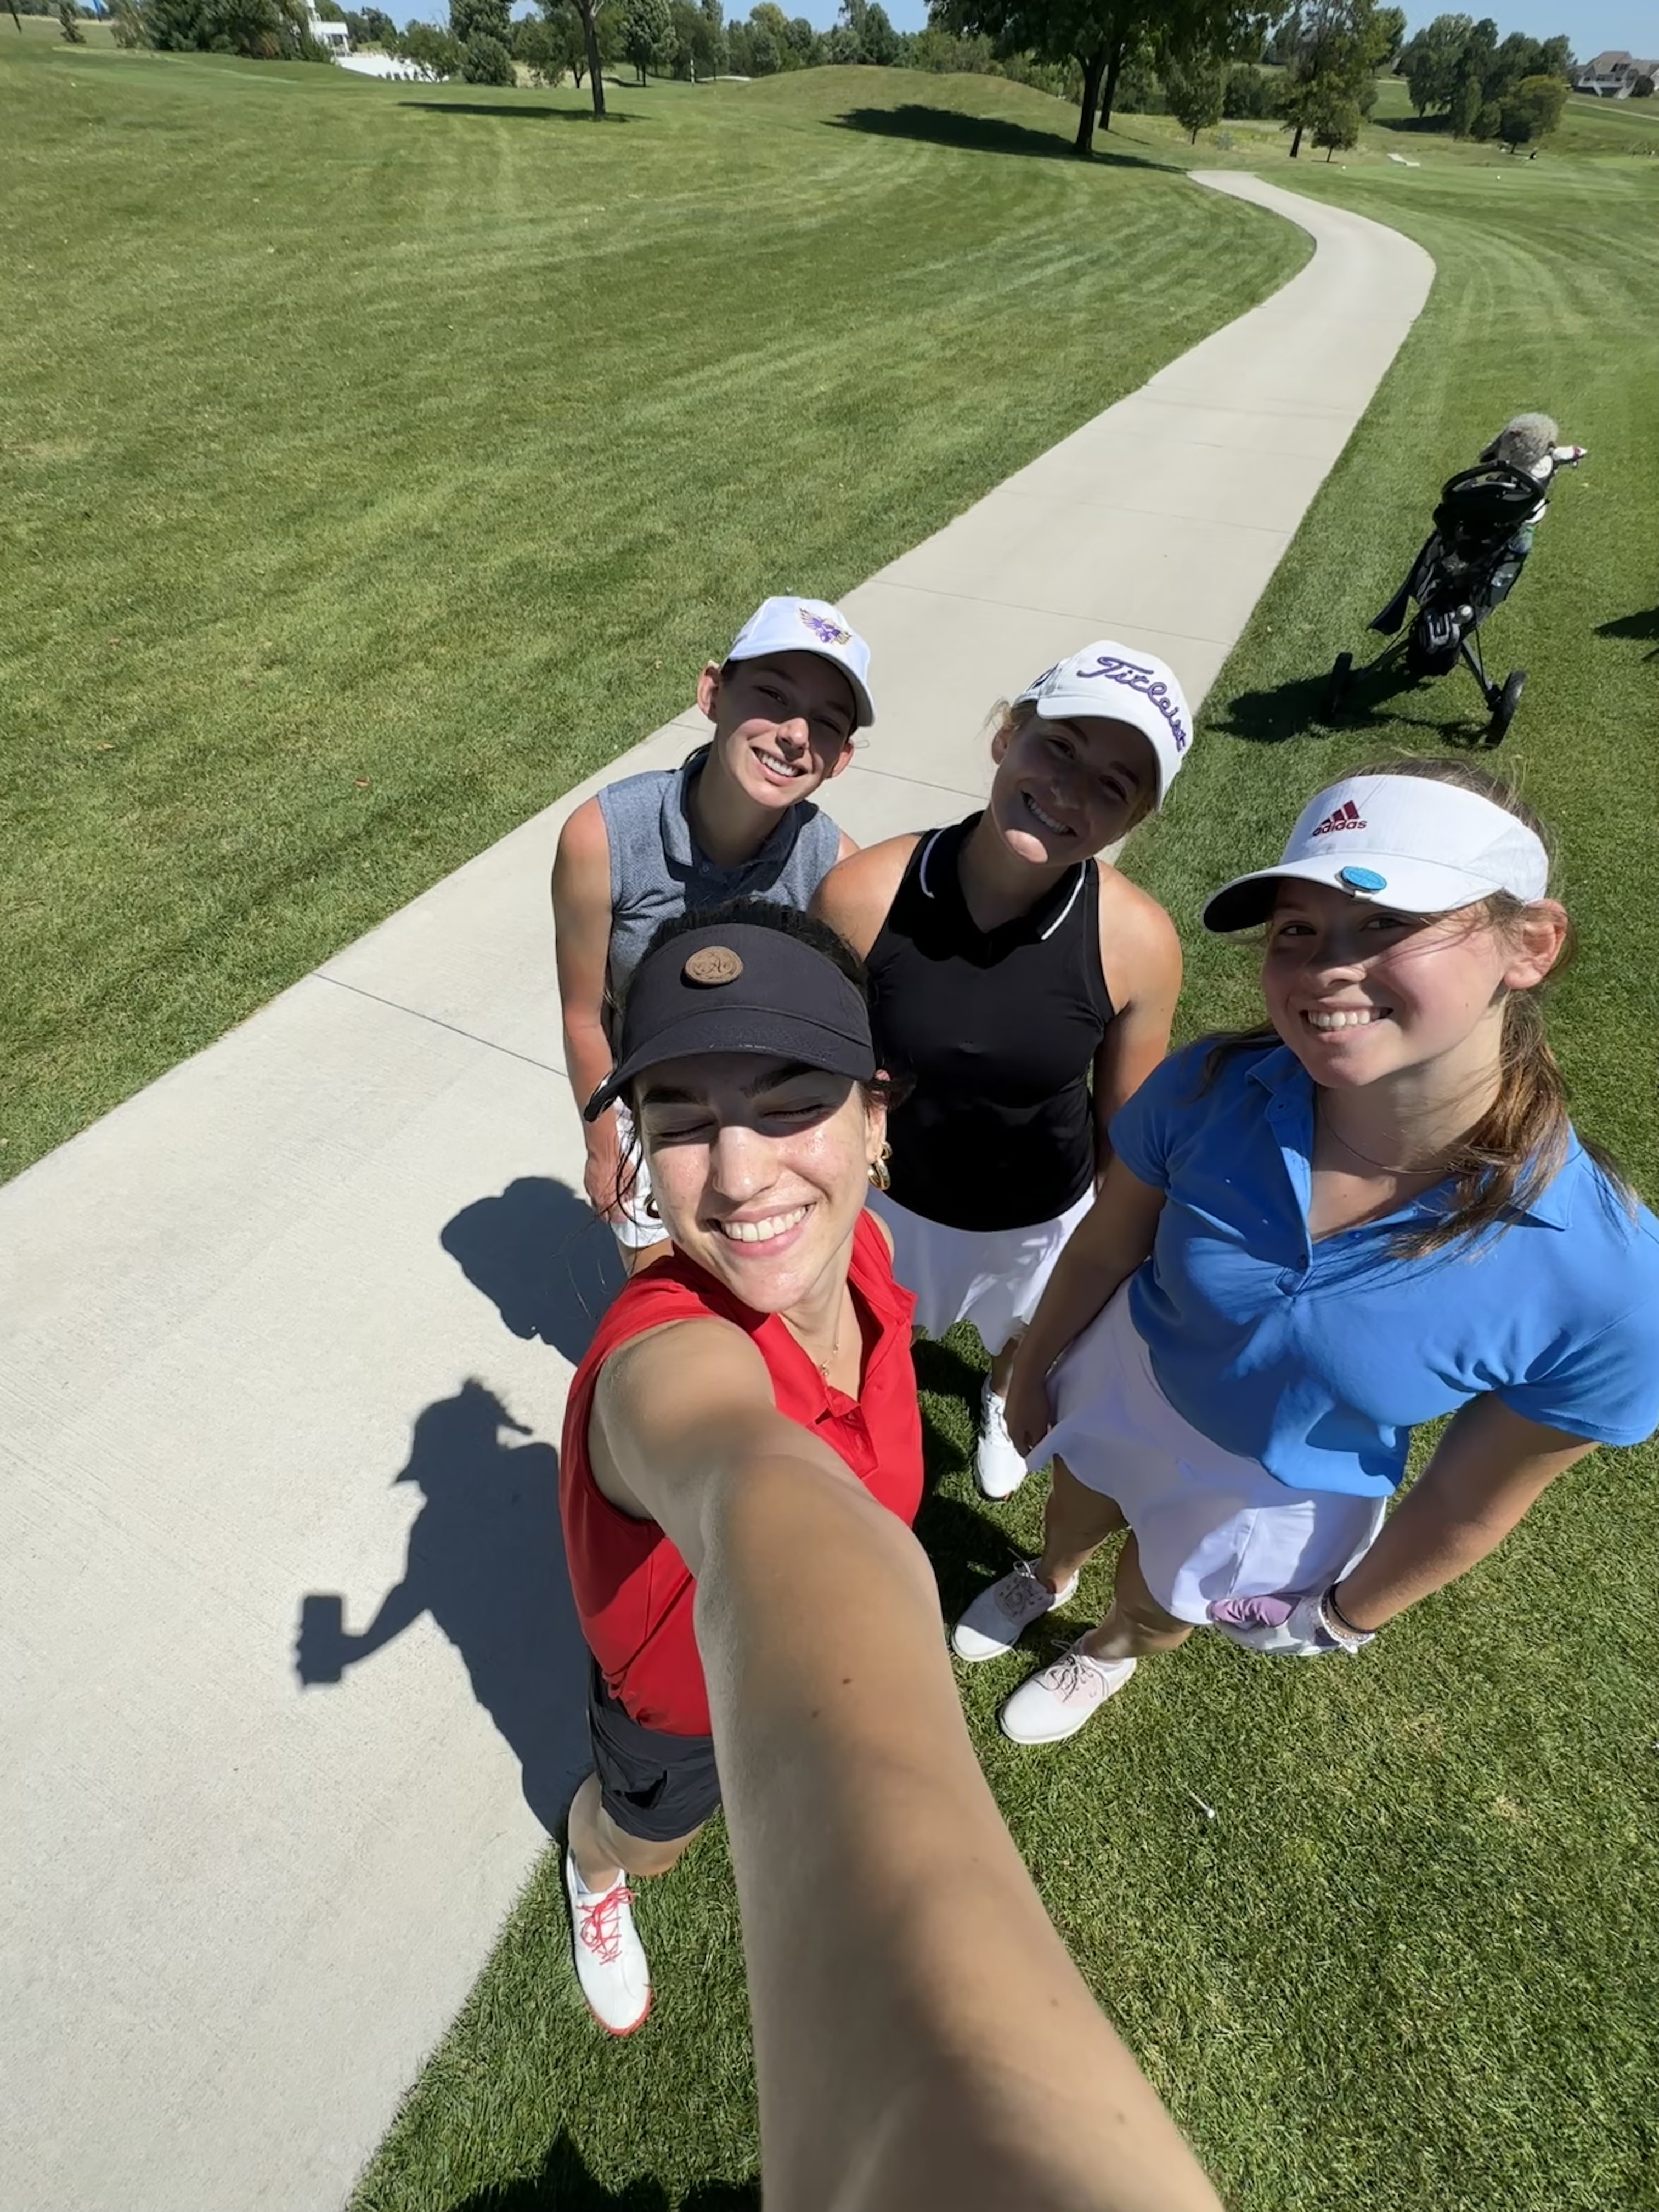 This is a photo of me with some golfer girls